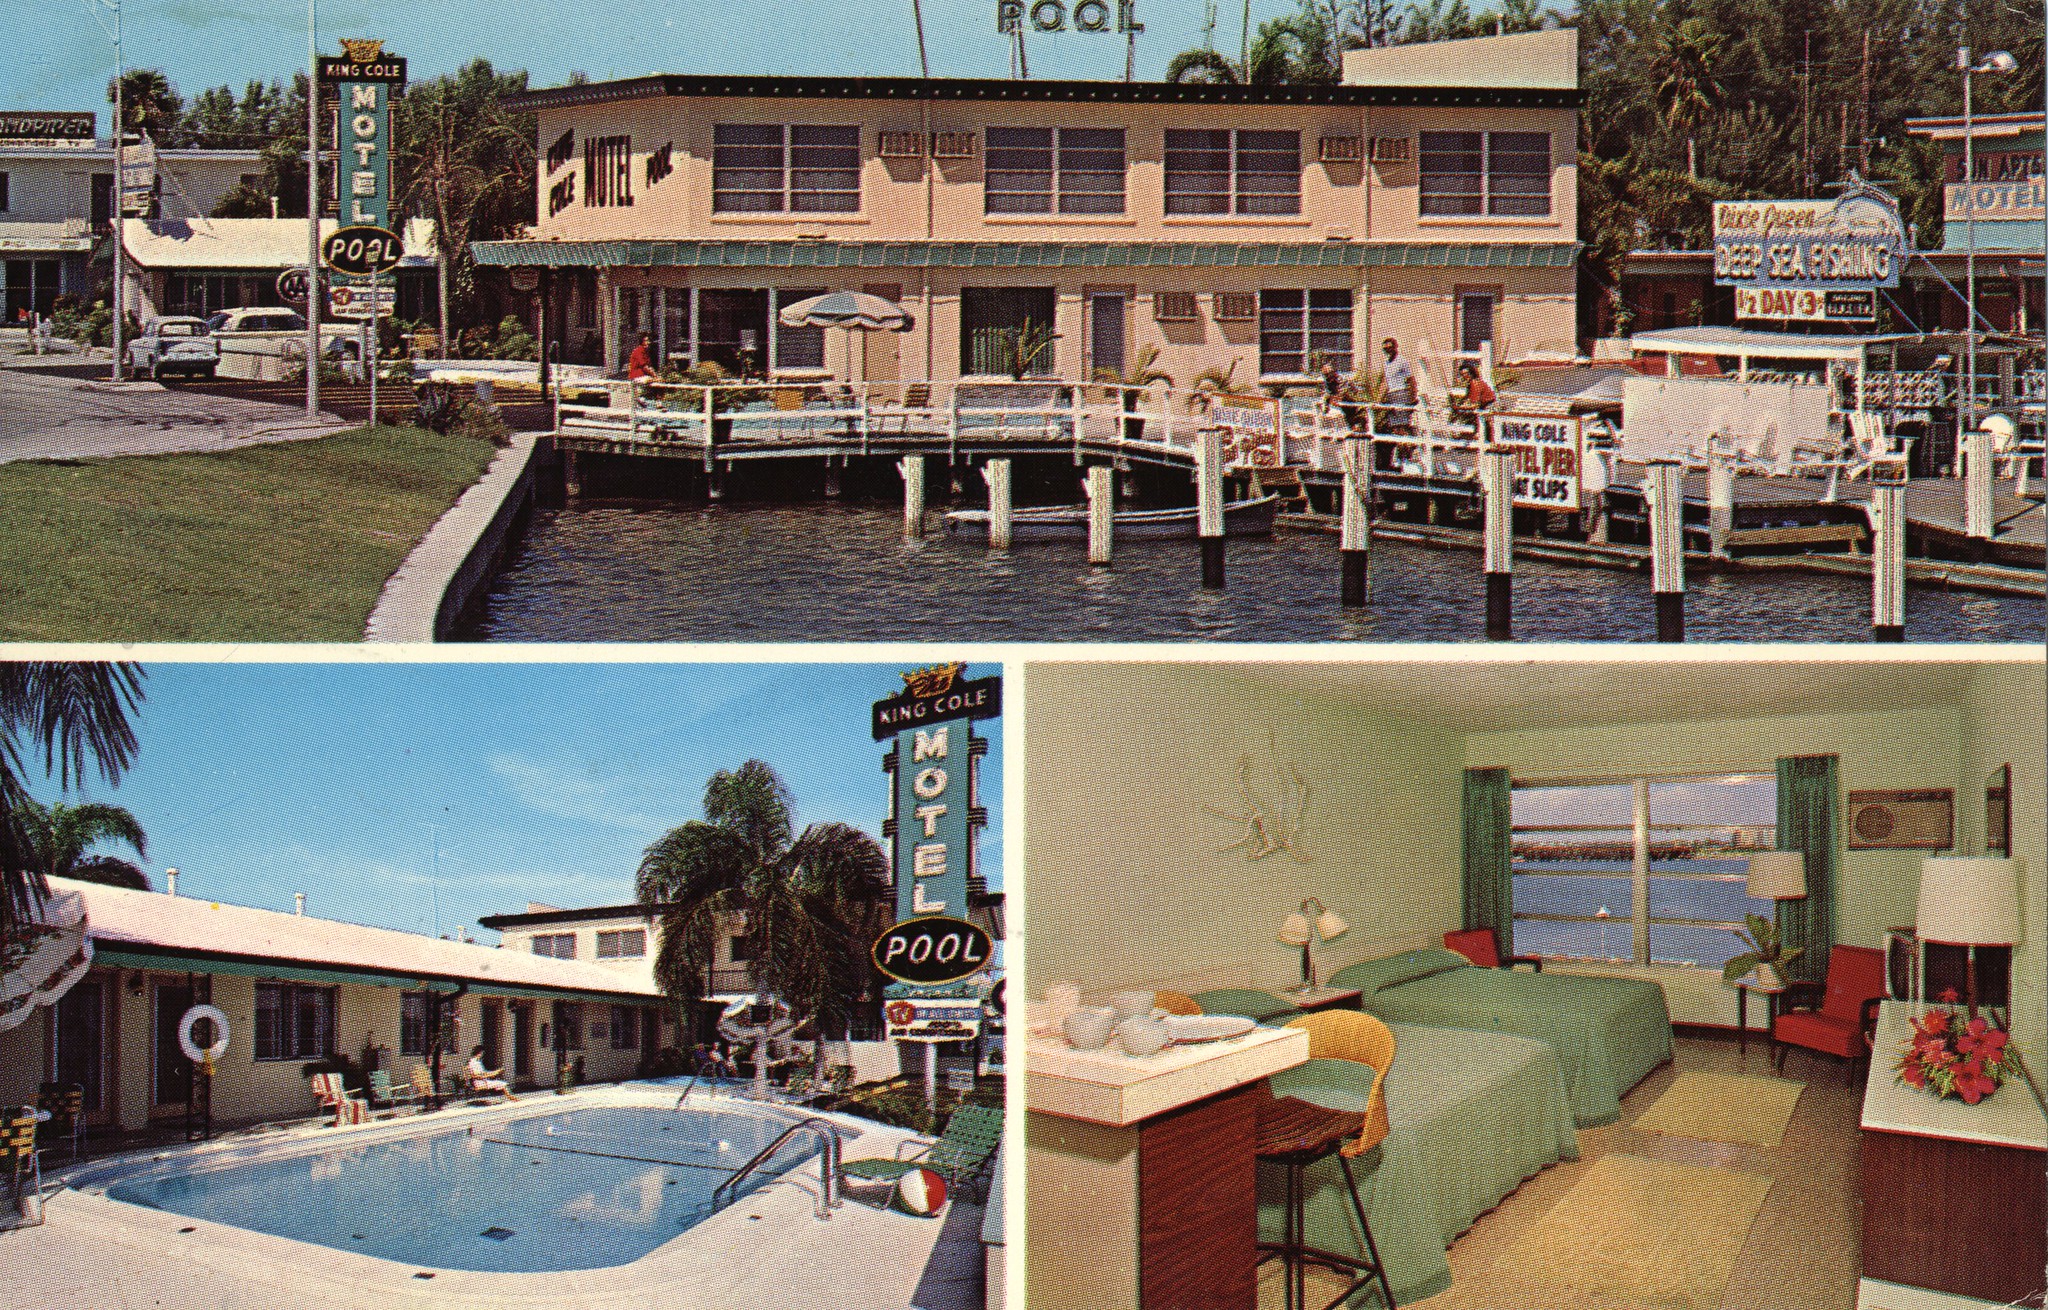 King Cole Motel - Clearwater Beach, Florida